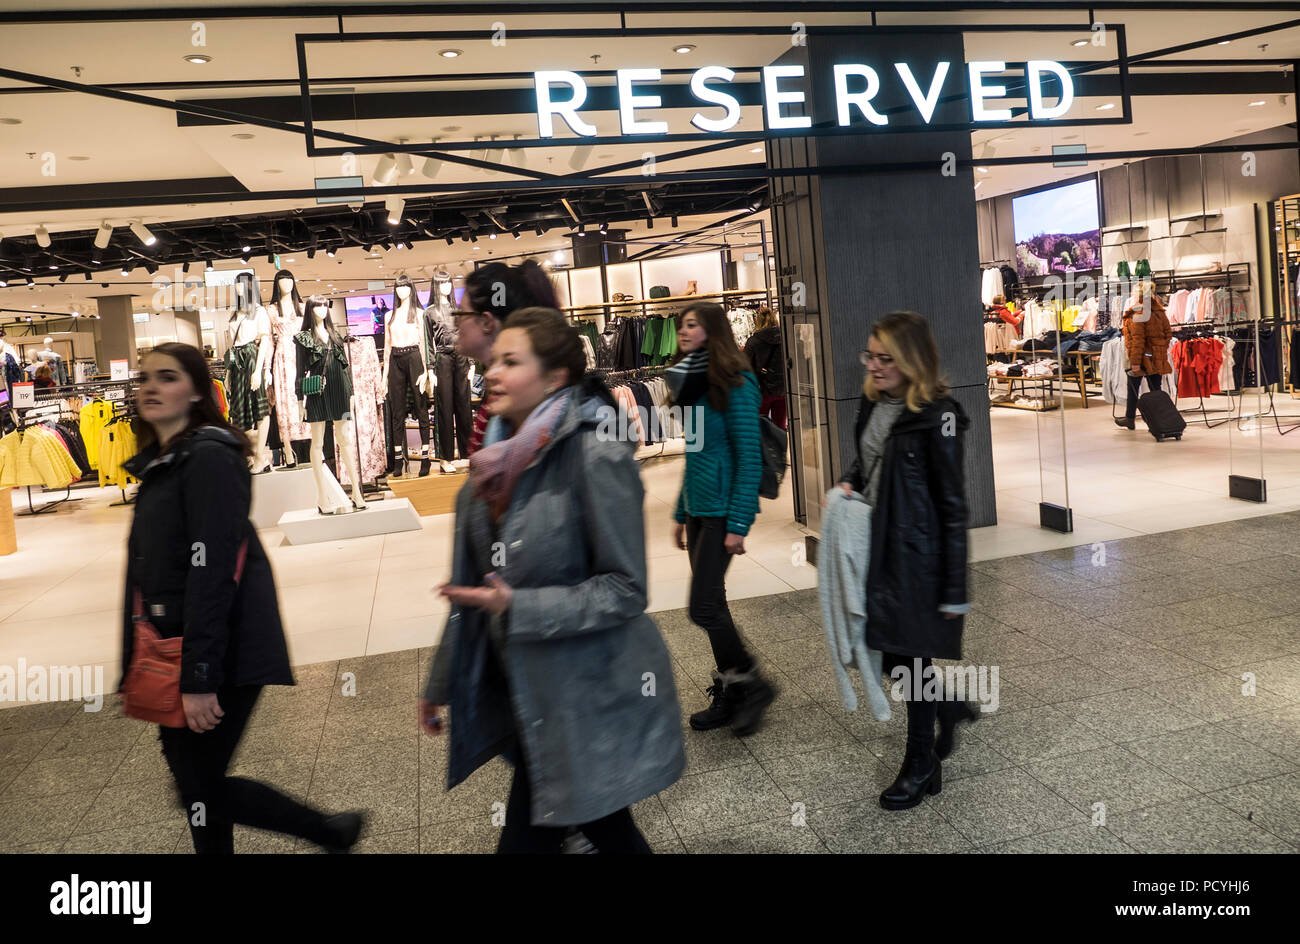 POLAND, KRAKOW - March 19, 2018: Reserved store in Galeria Krakowska.  Reserved is one of brands of LPP S. A. (Lubianiec Piechocki and Partnerzy)  is a large Polish retailing company based in